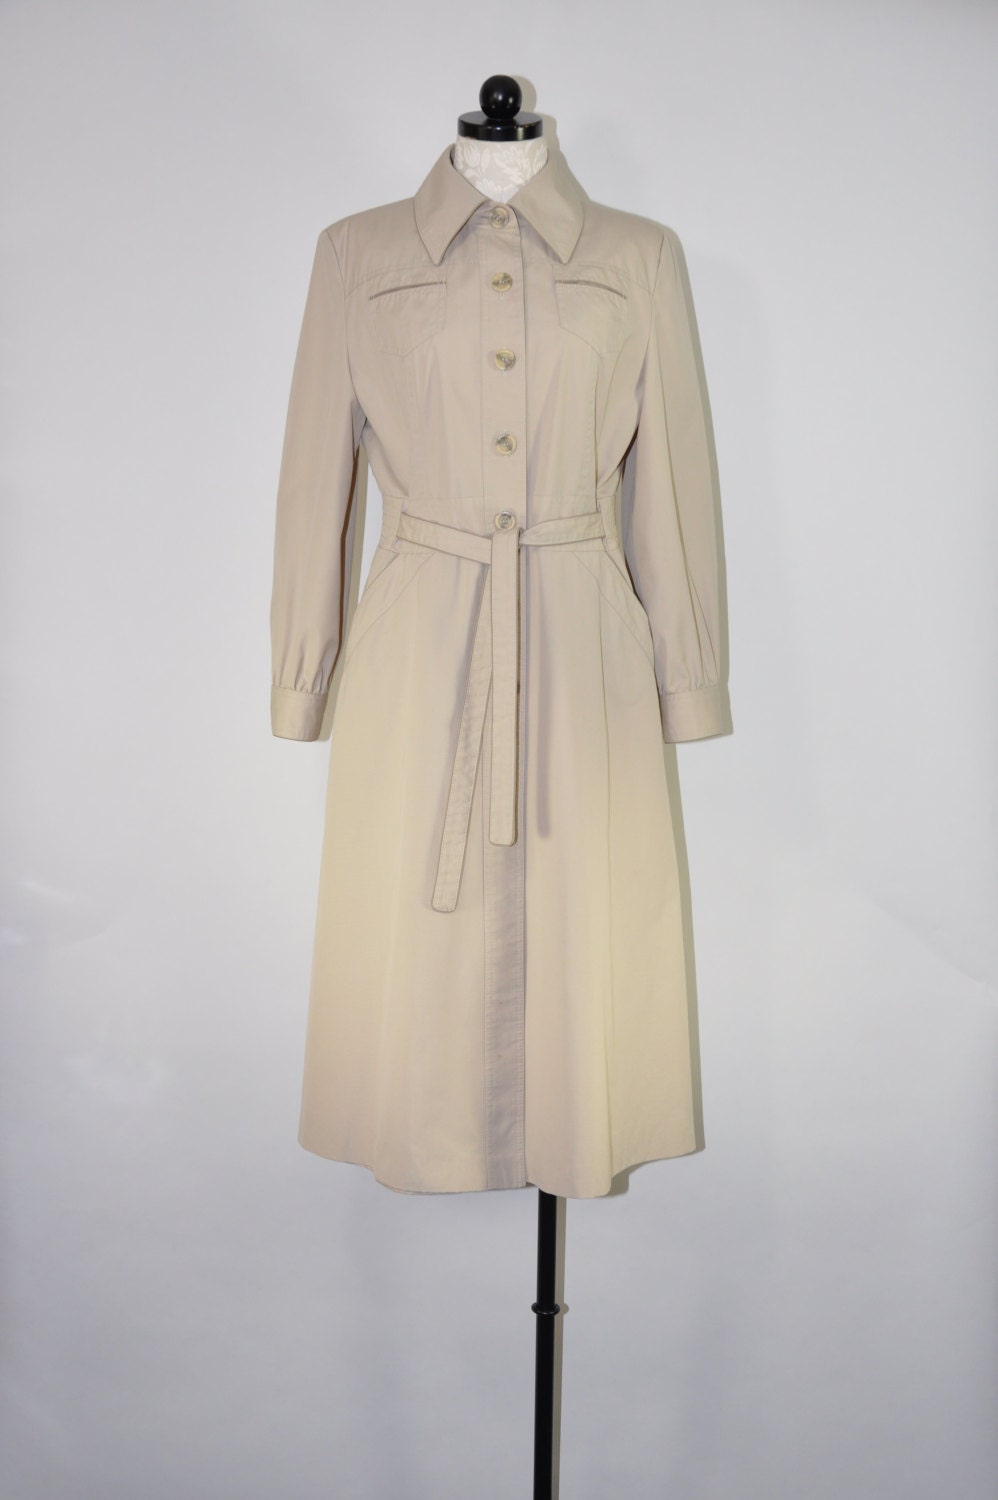 80s khaki trench coat / classic belted trench / waterproof